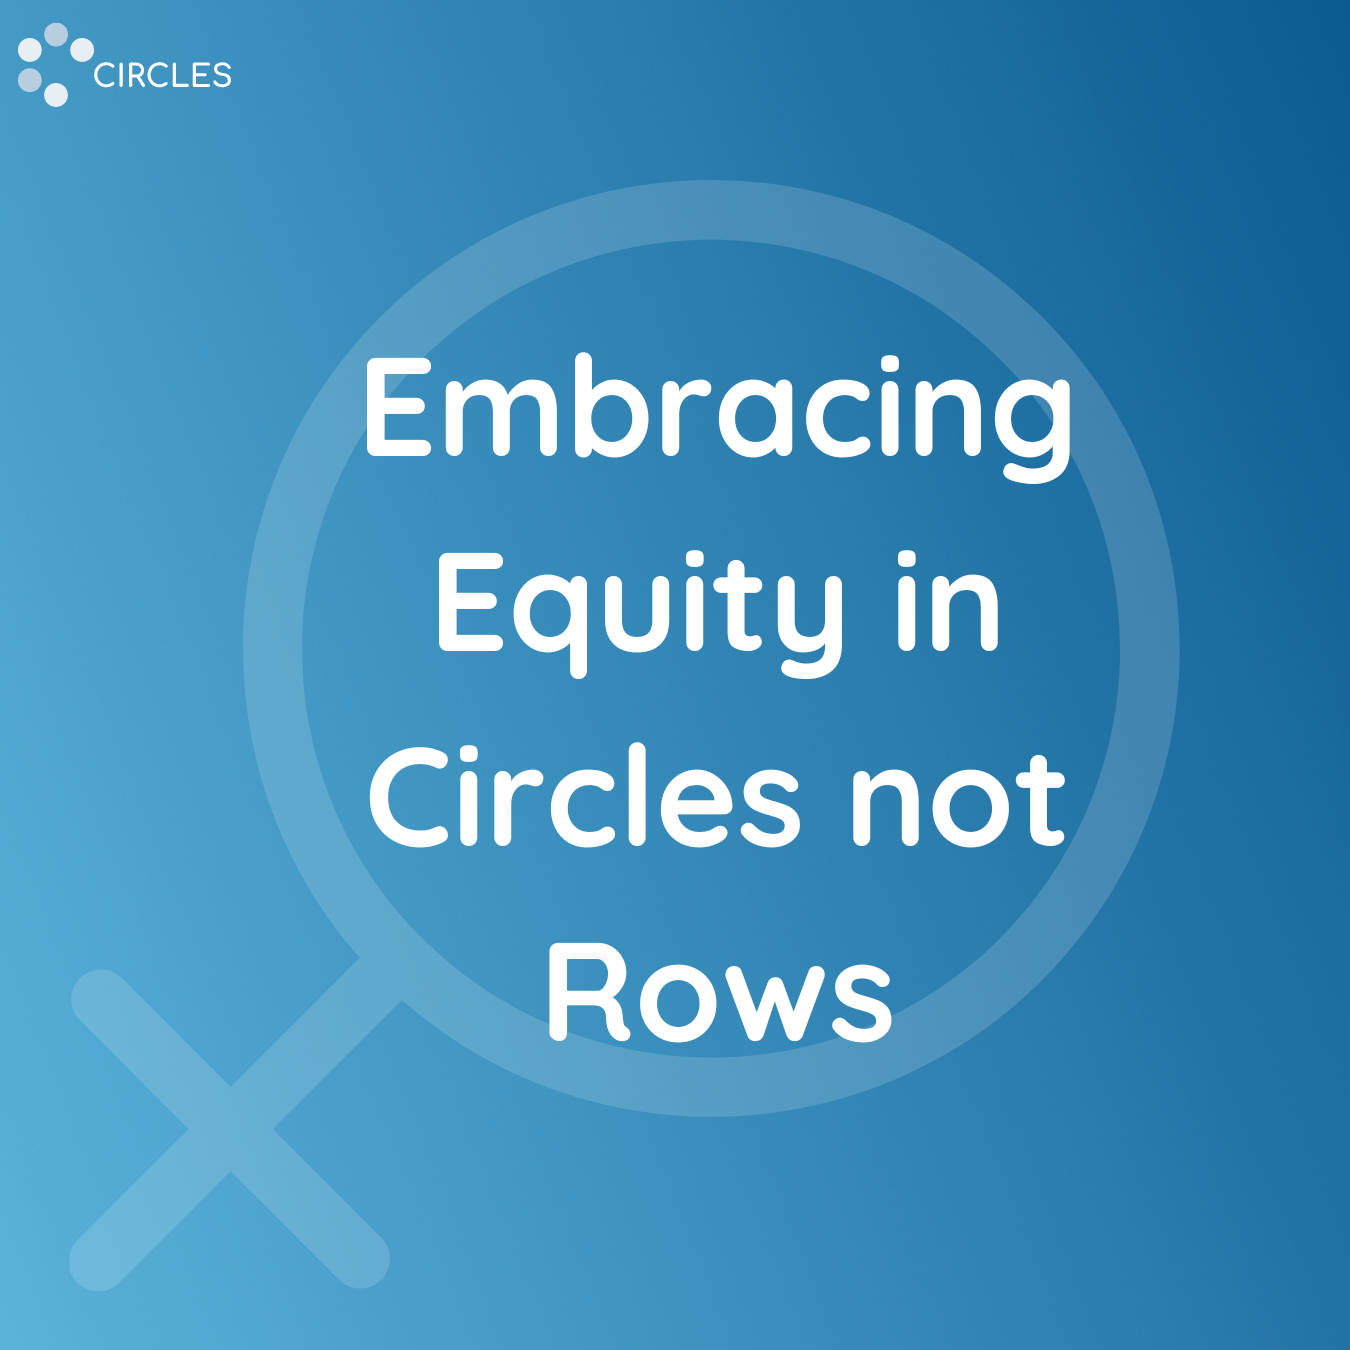 Embracing Equity in Circles not Rows